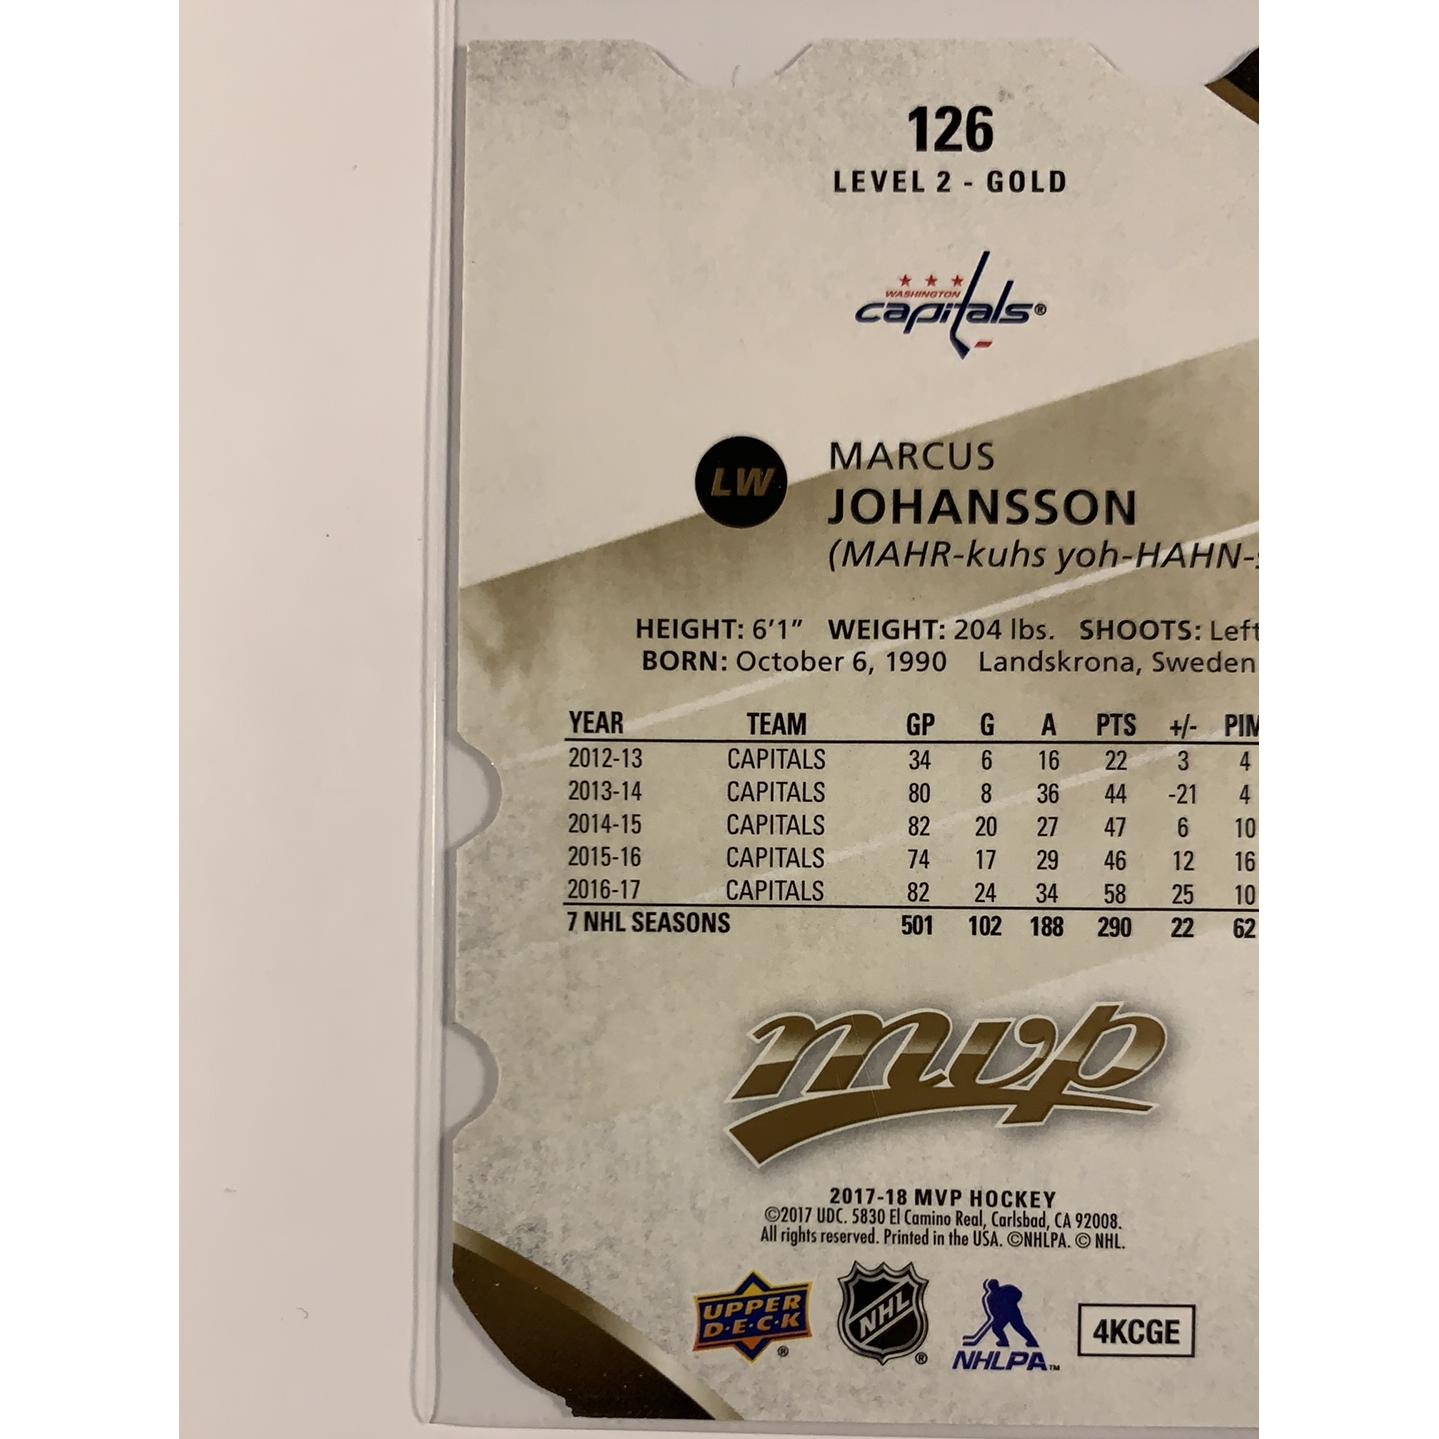  2017-18 MVP Marcus Johansson Level 2 Gold Engraved Auto  Local Legends Cards & Collectibles